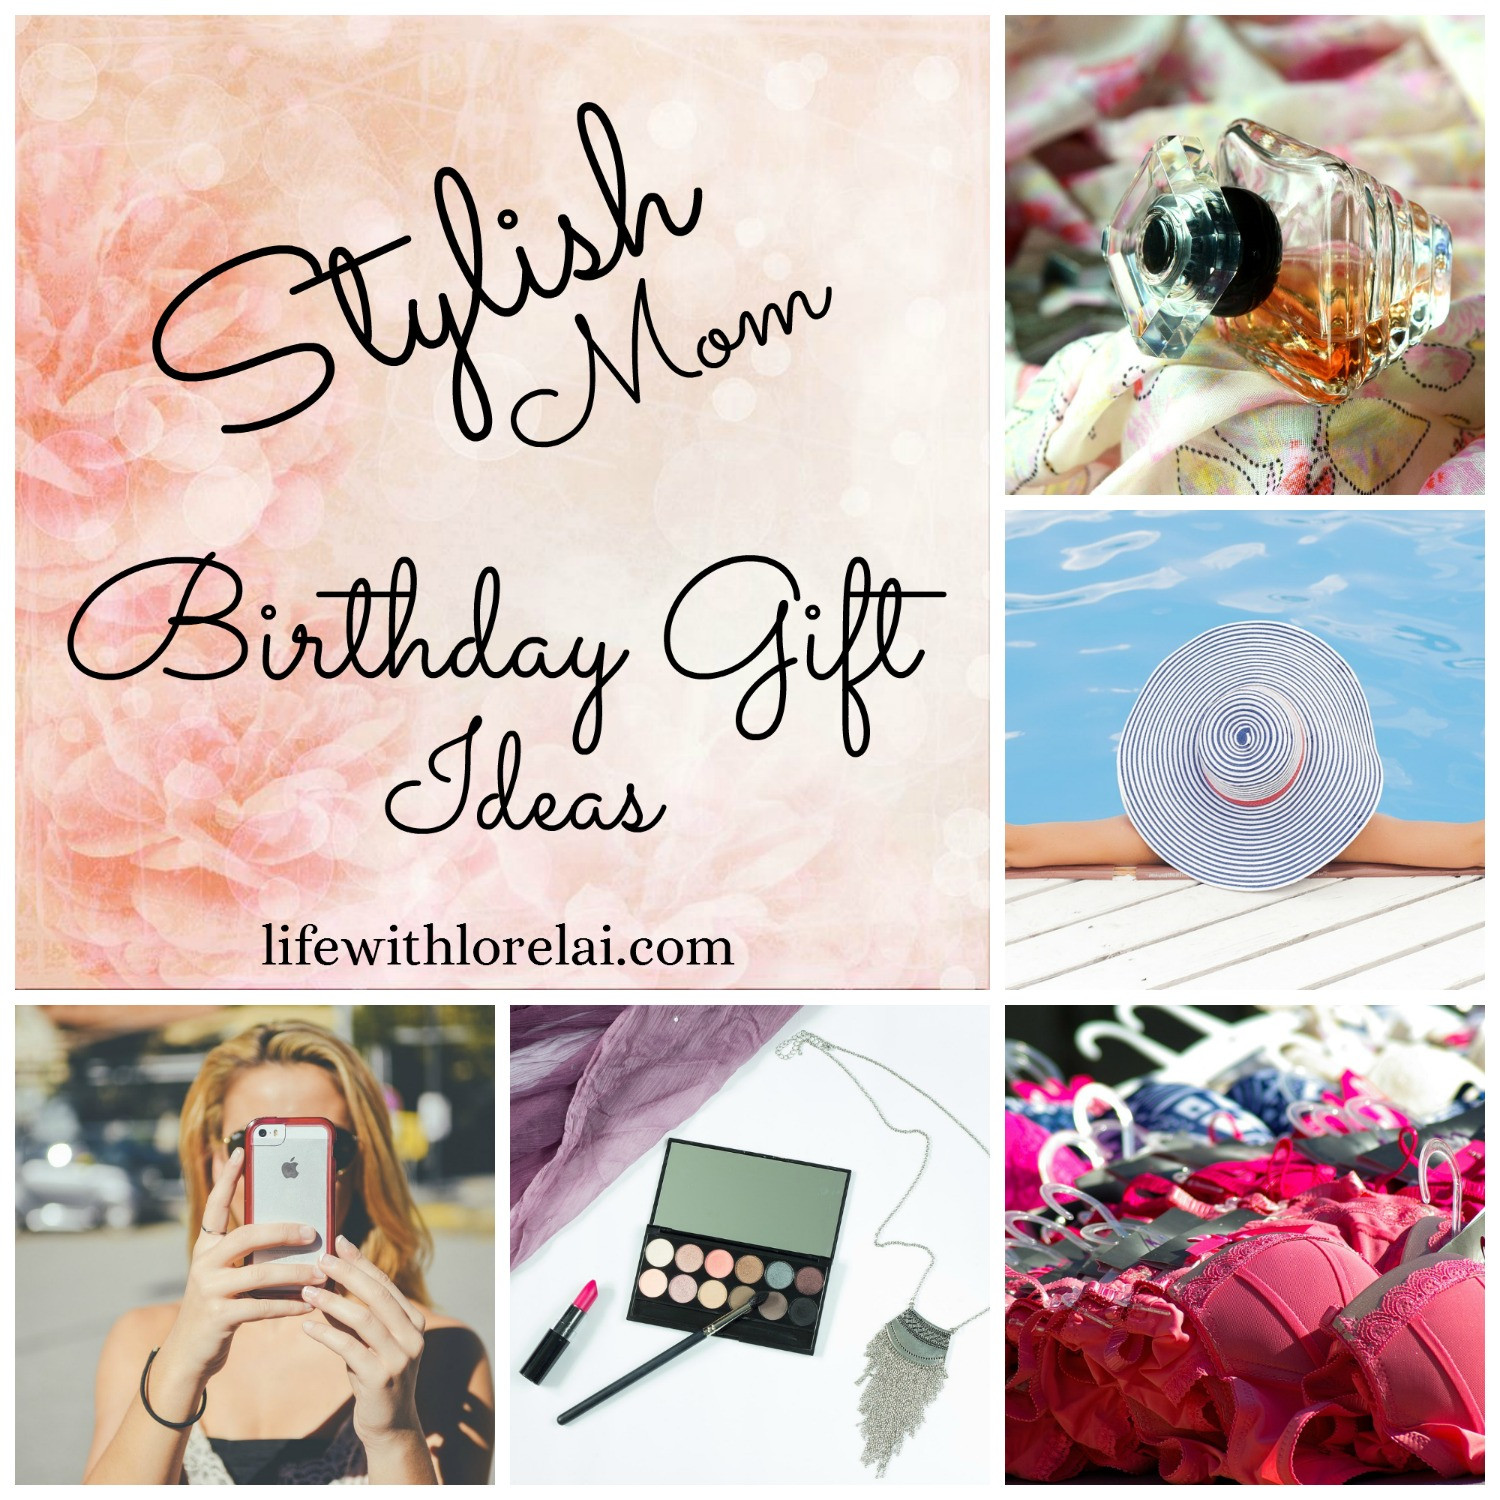 Birthday Gift For Mother
 Birthday Gift Ideas For The Stylish Mom Life With Lorelai